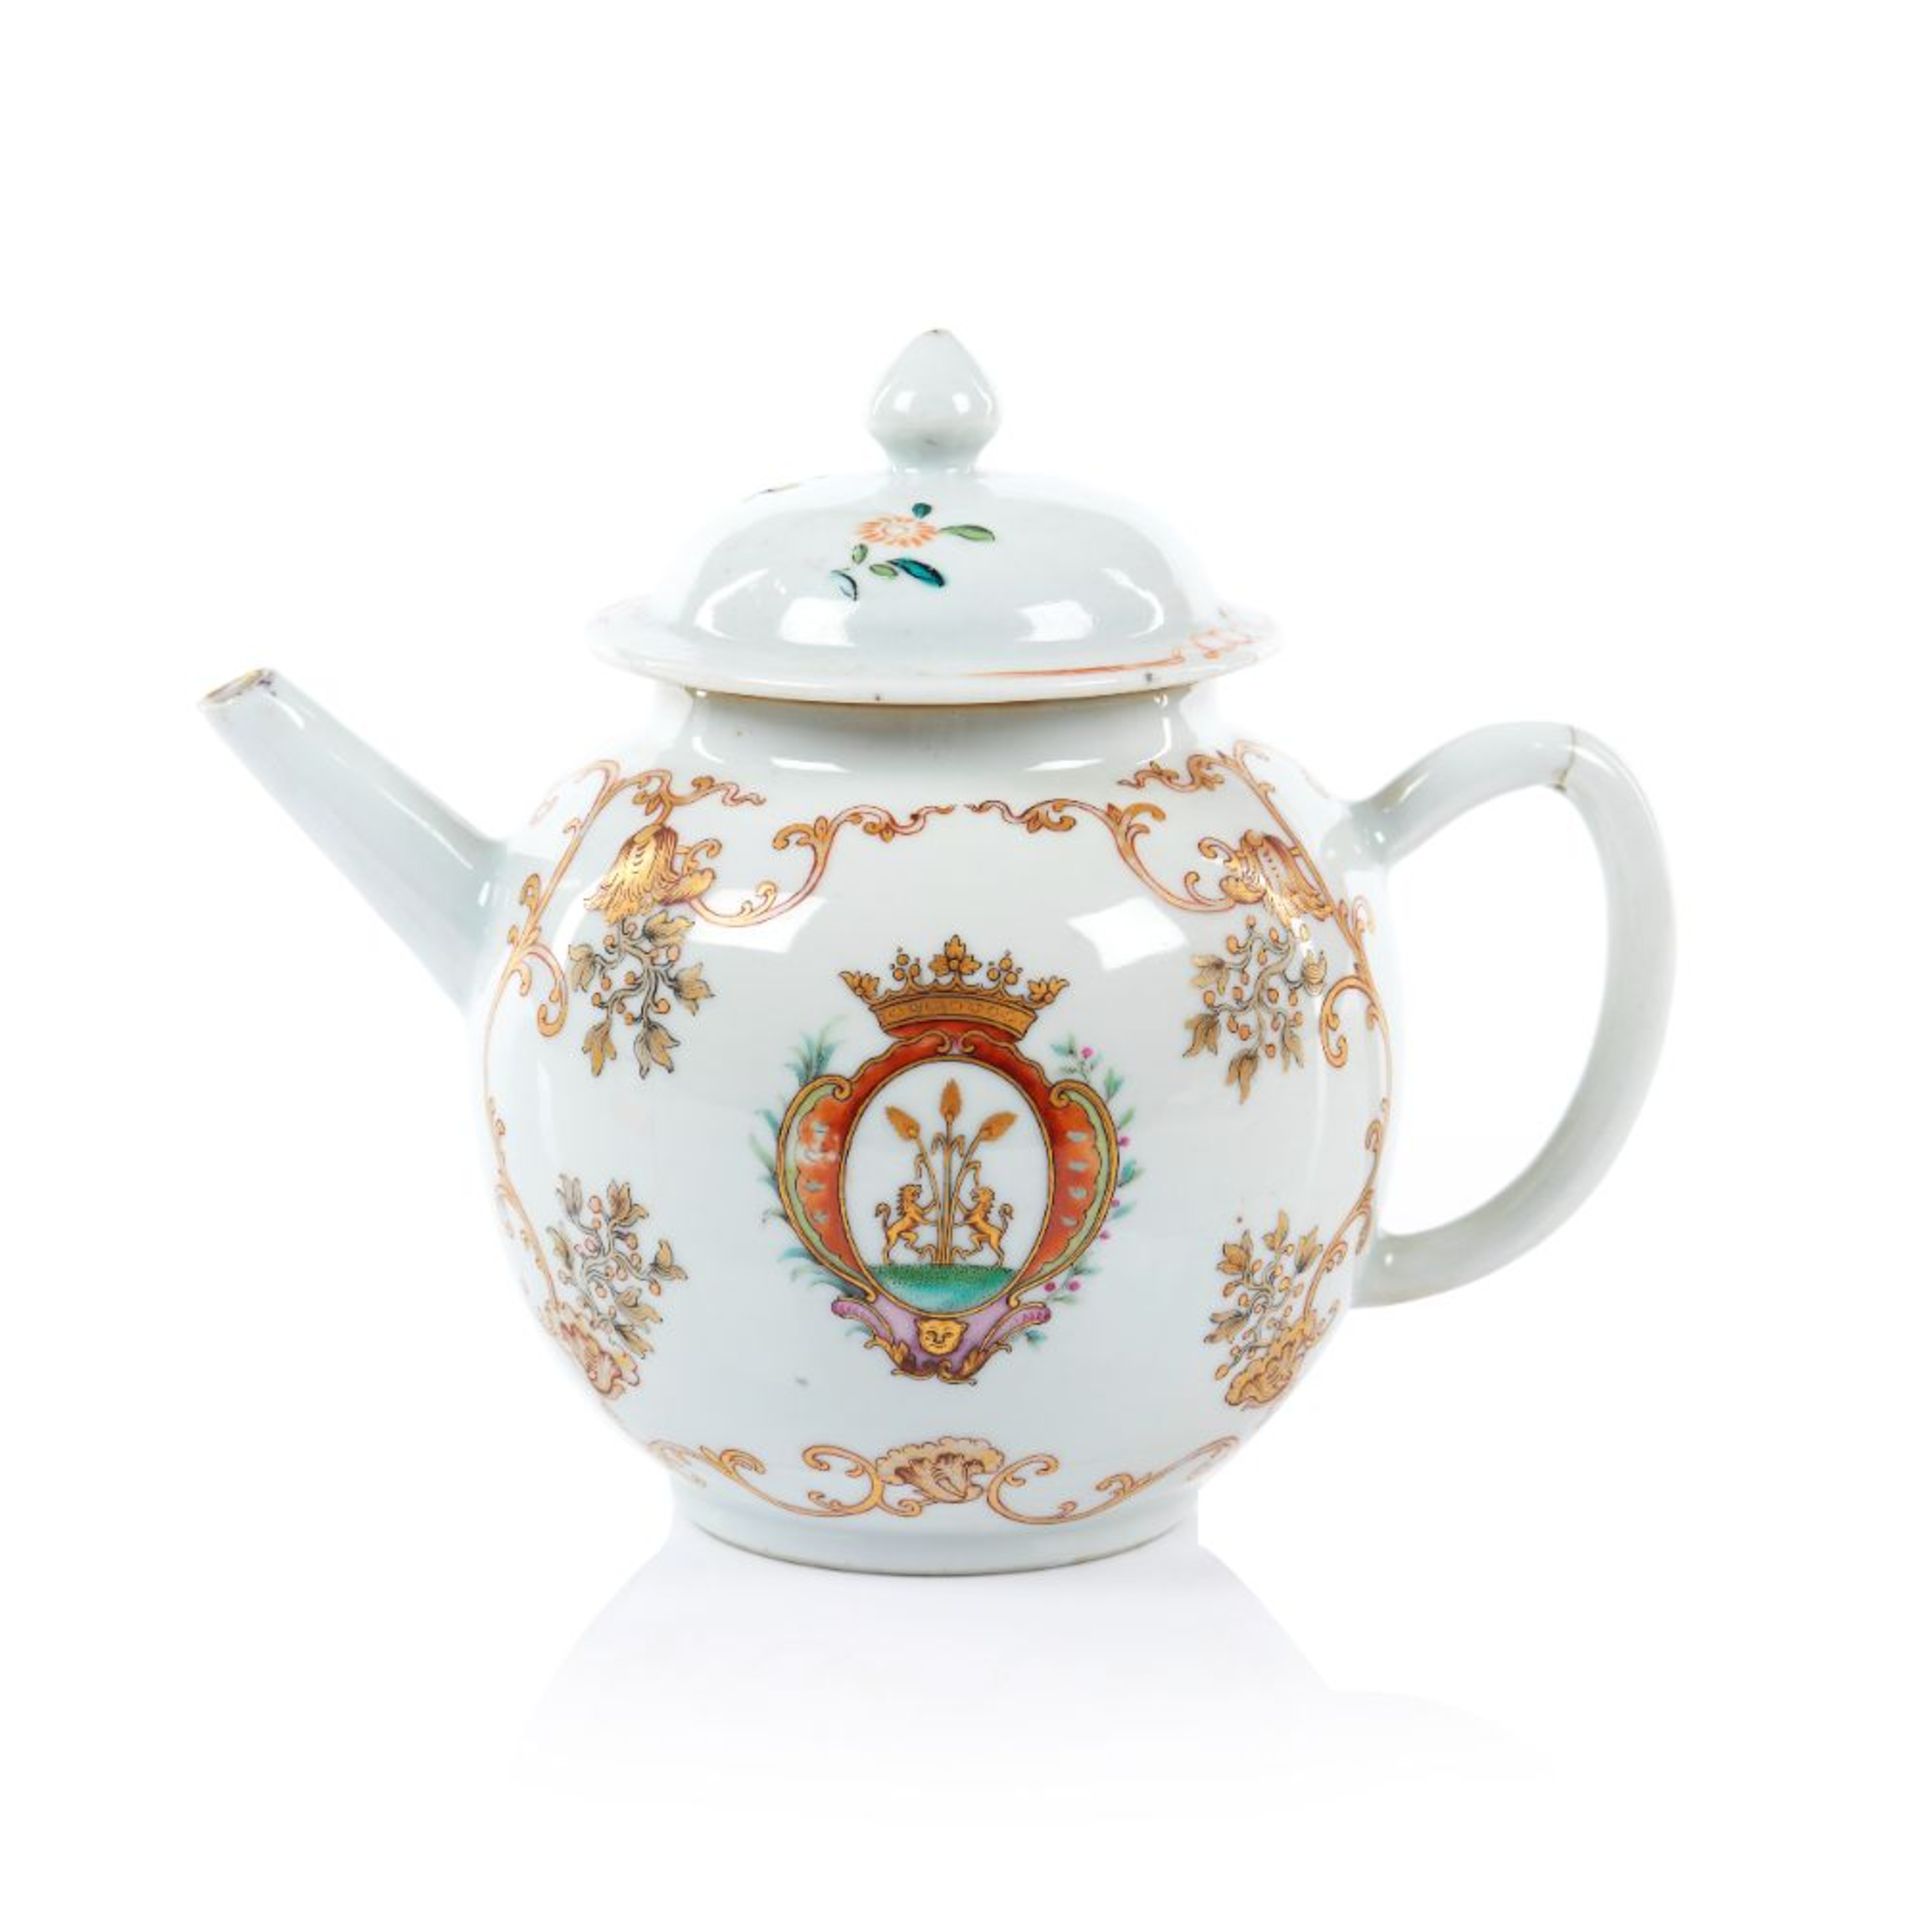 An armorial teapot and cover